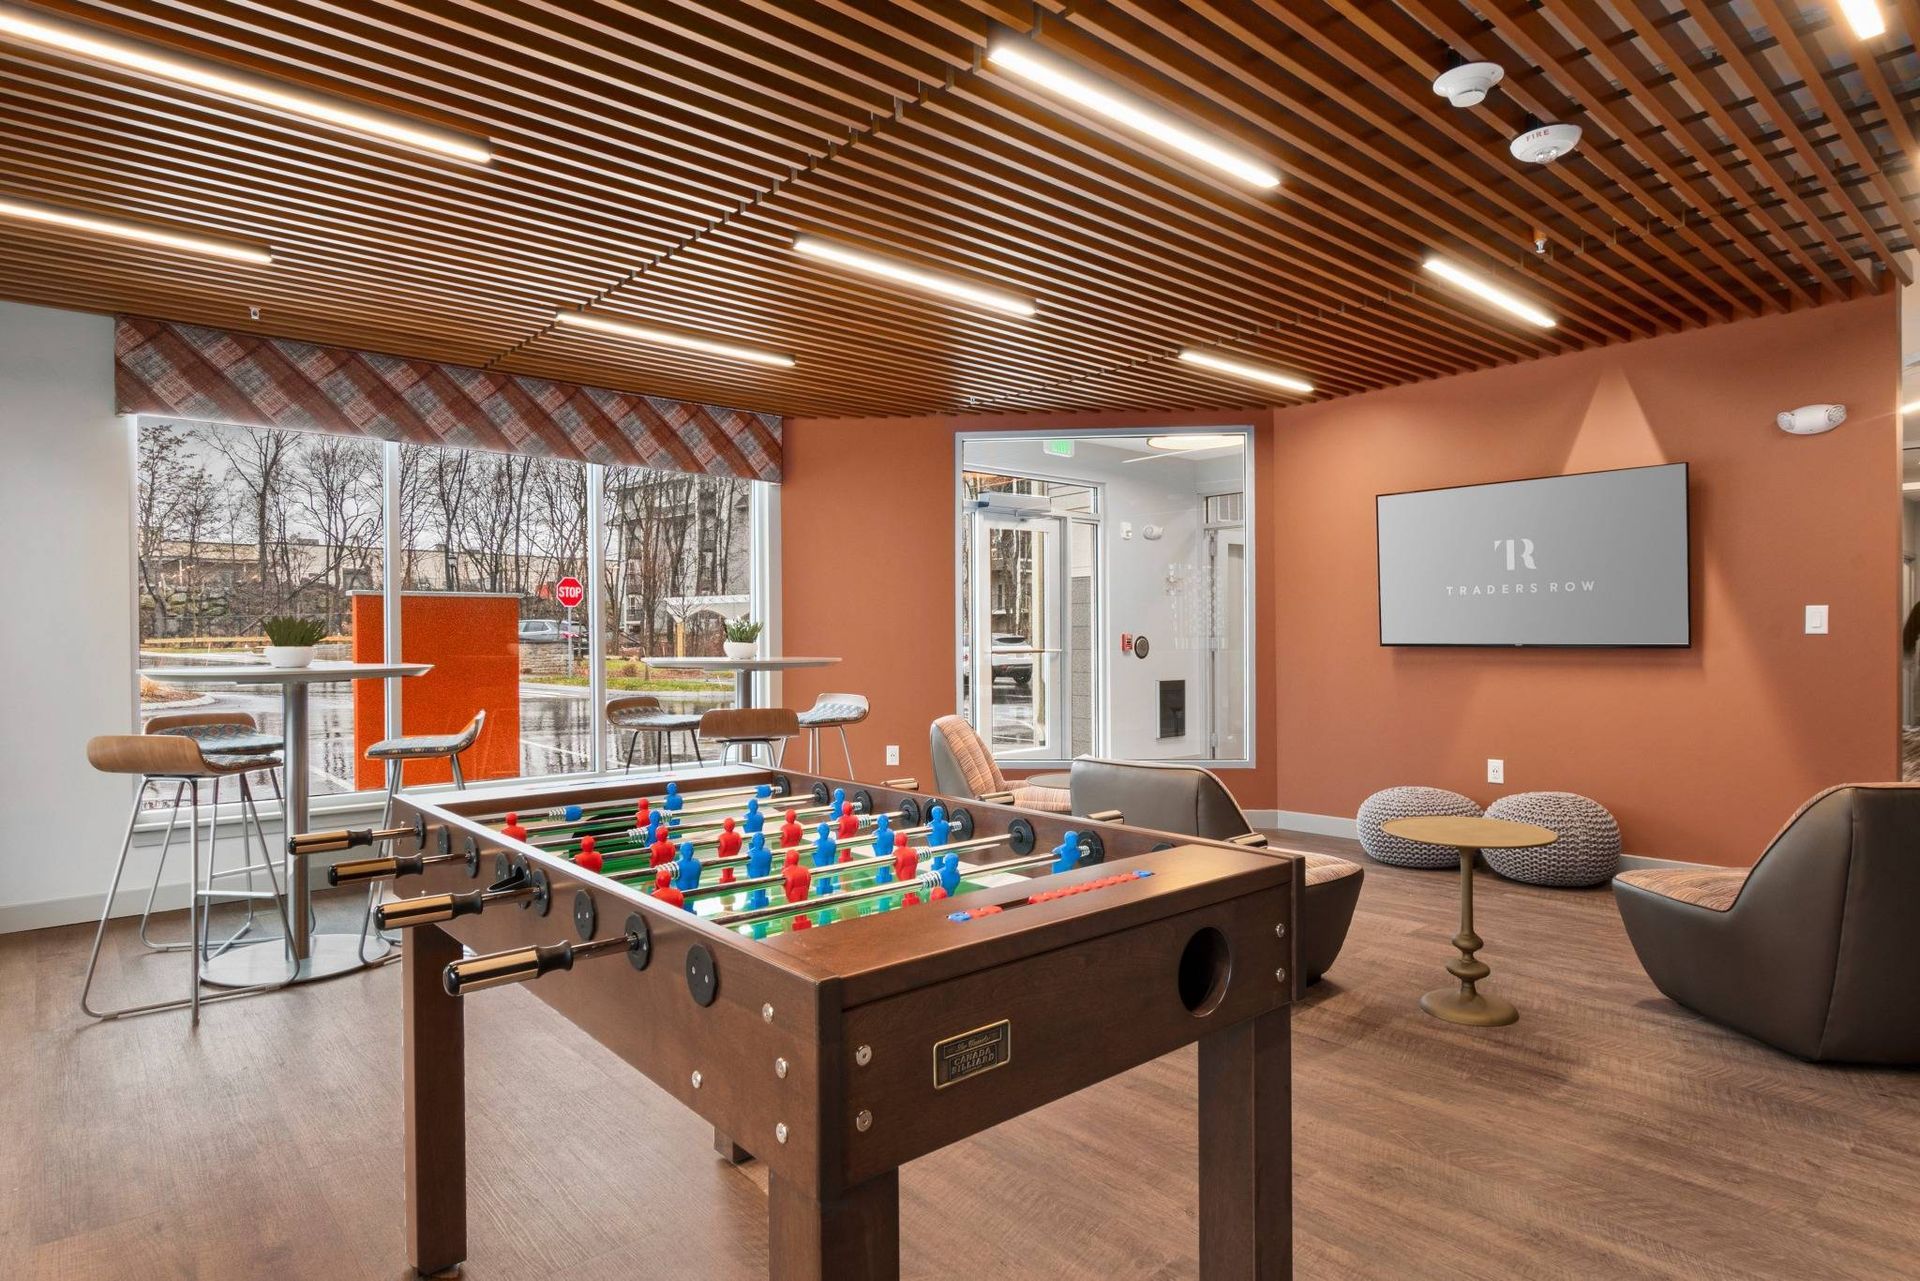 Traders Row entertainment lounge with foosball and designer lighting.